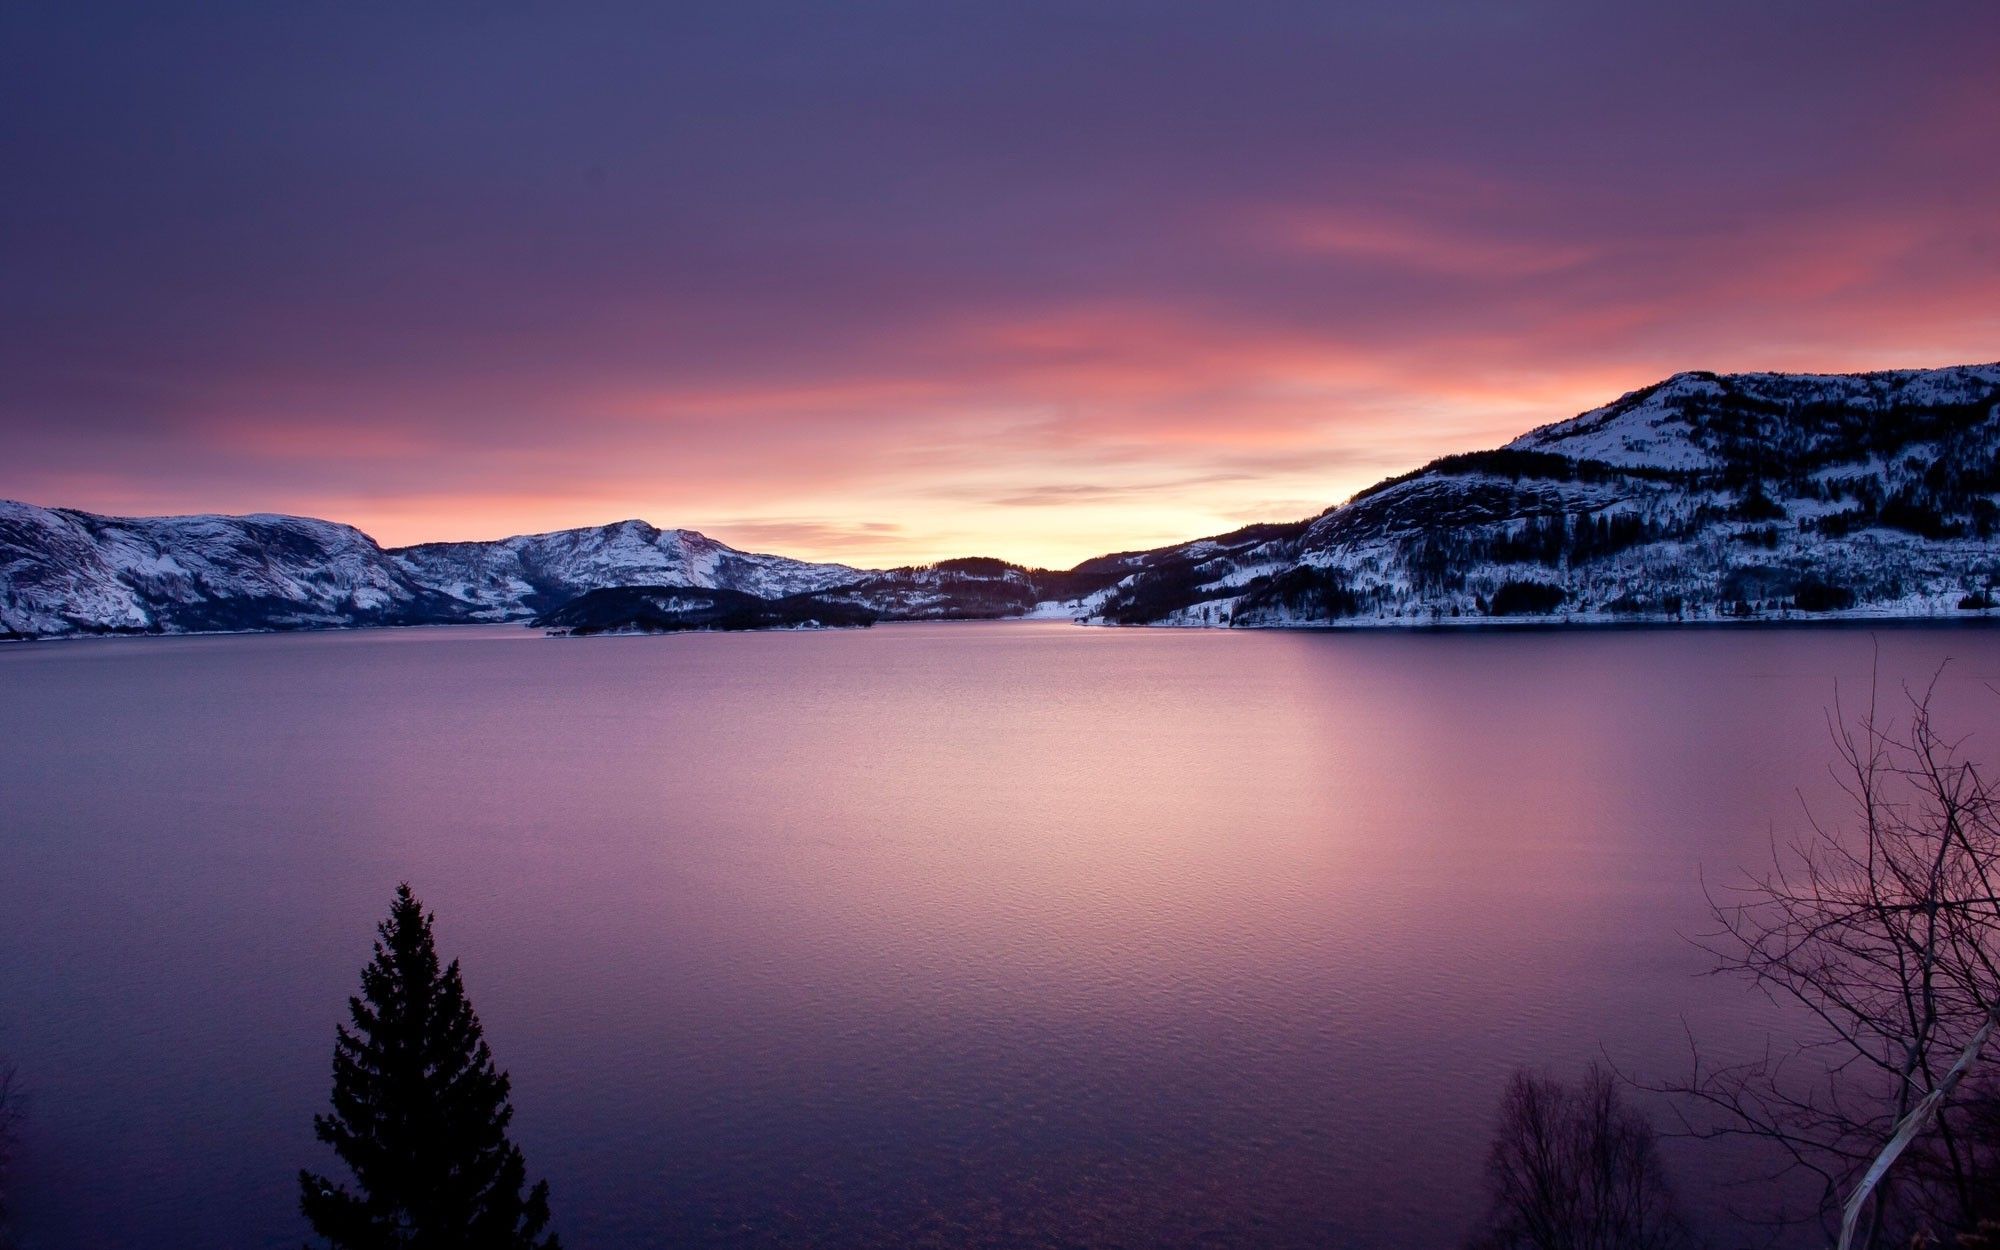 A pink and purple sunset over a lake surrounded by snow covered mountains - Lake